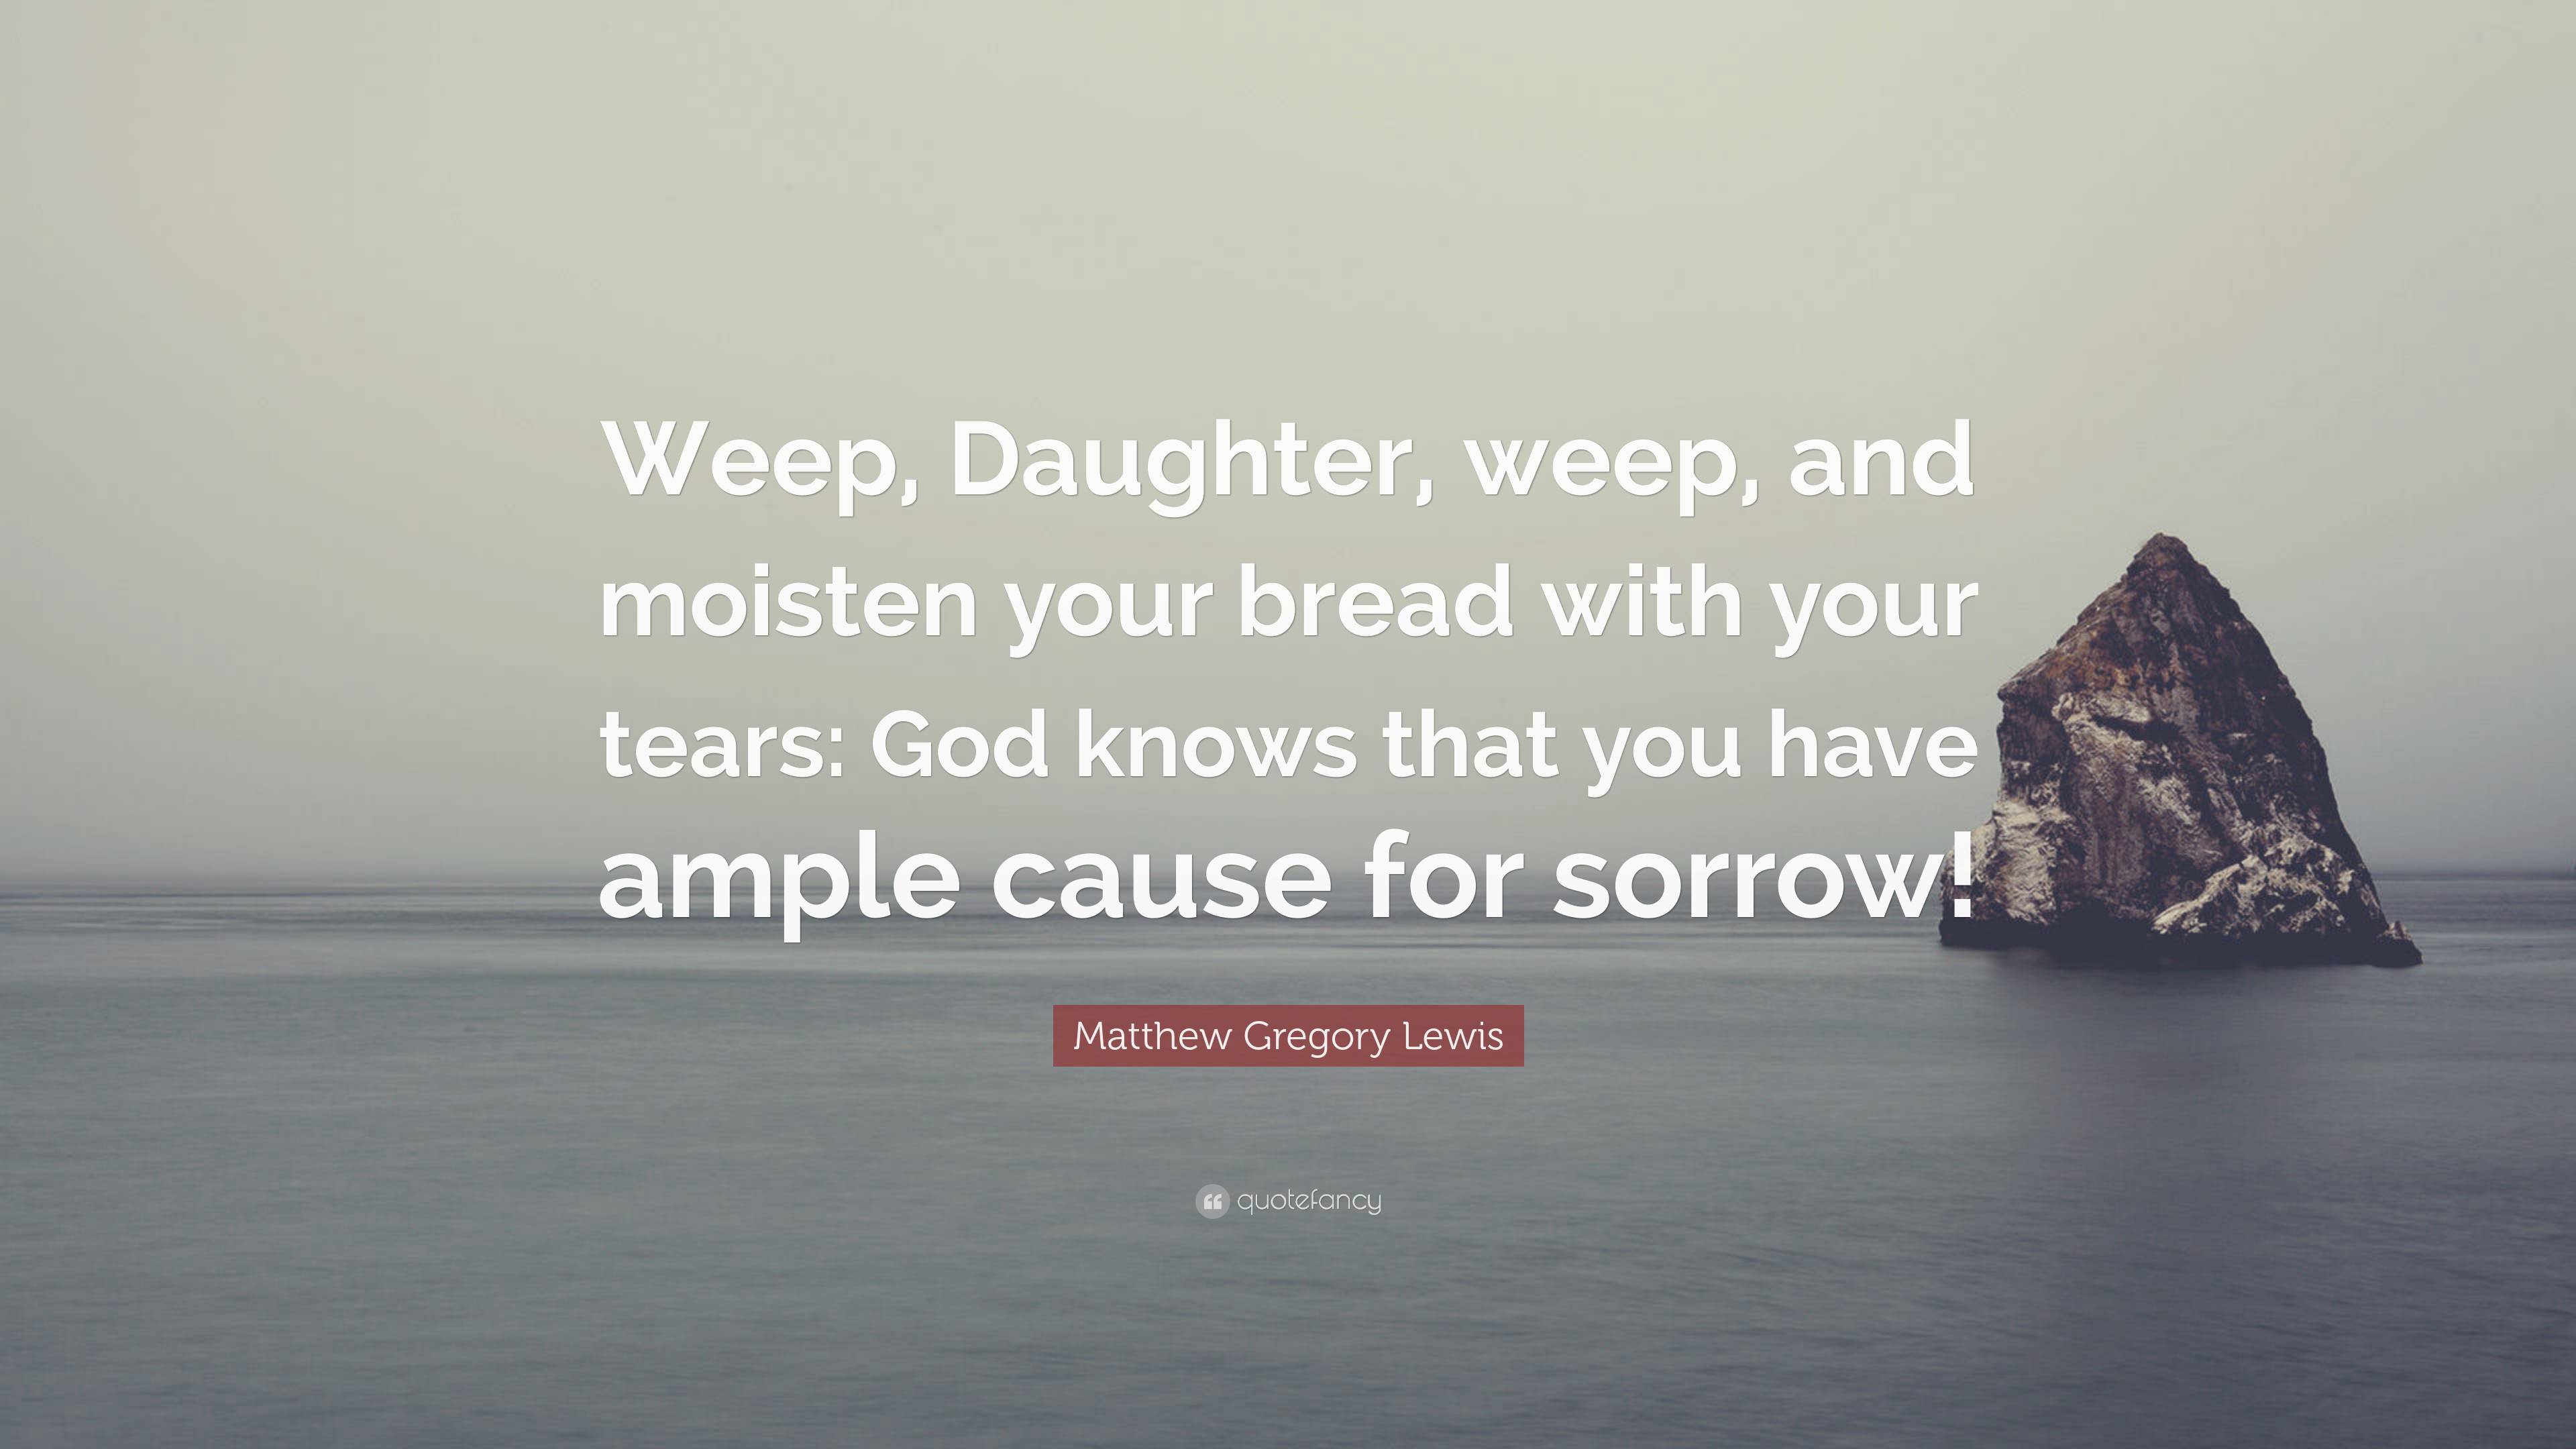 Matthew Gregory Lewis Quote: “Weep, Daughter, weep, and moisten your ...